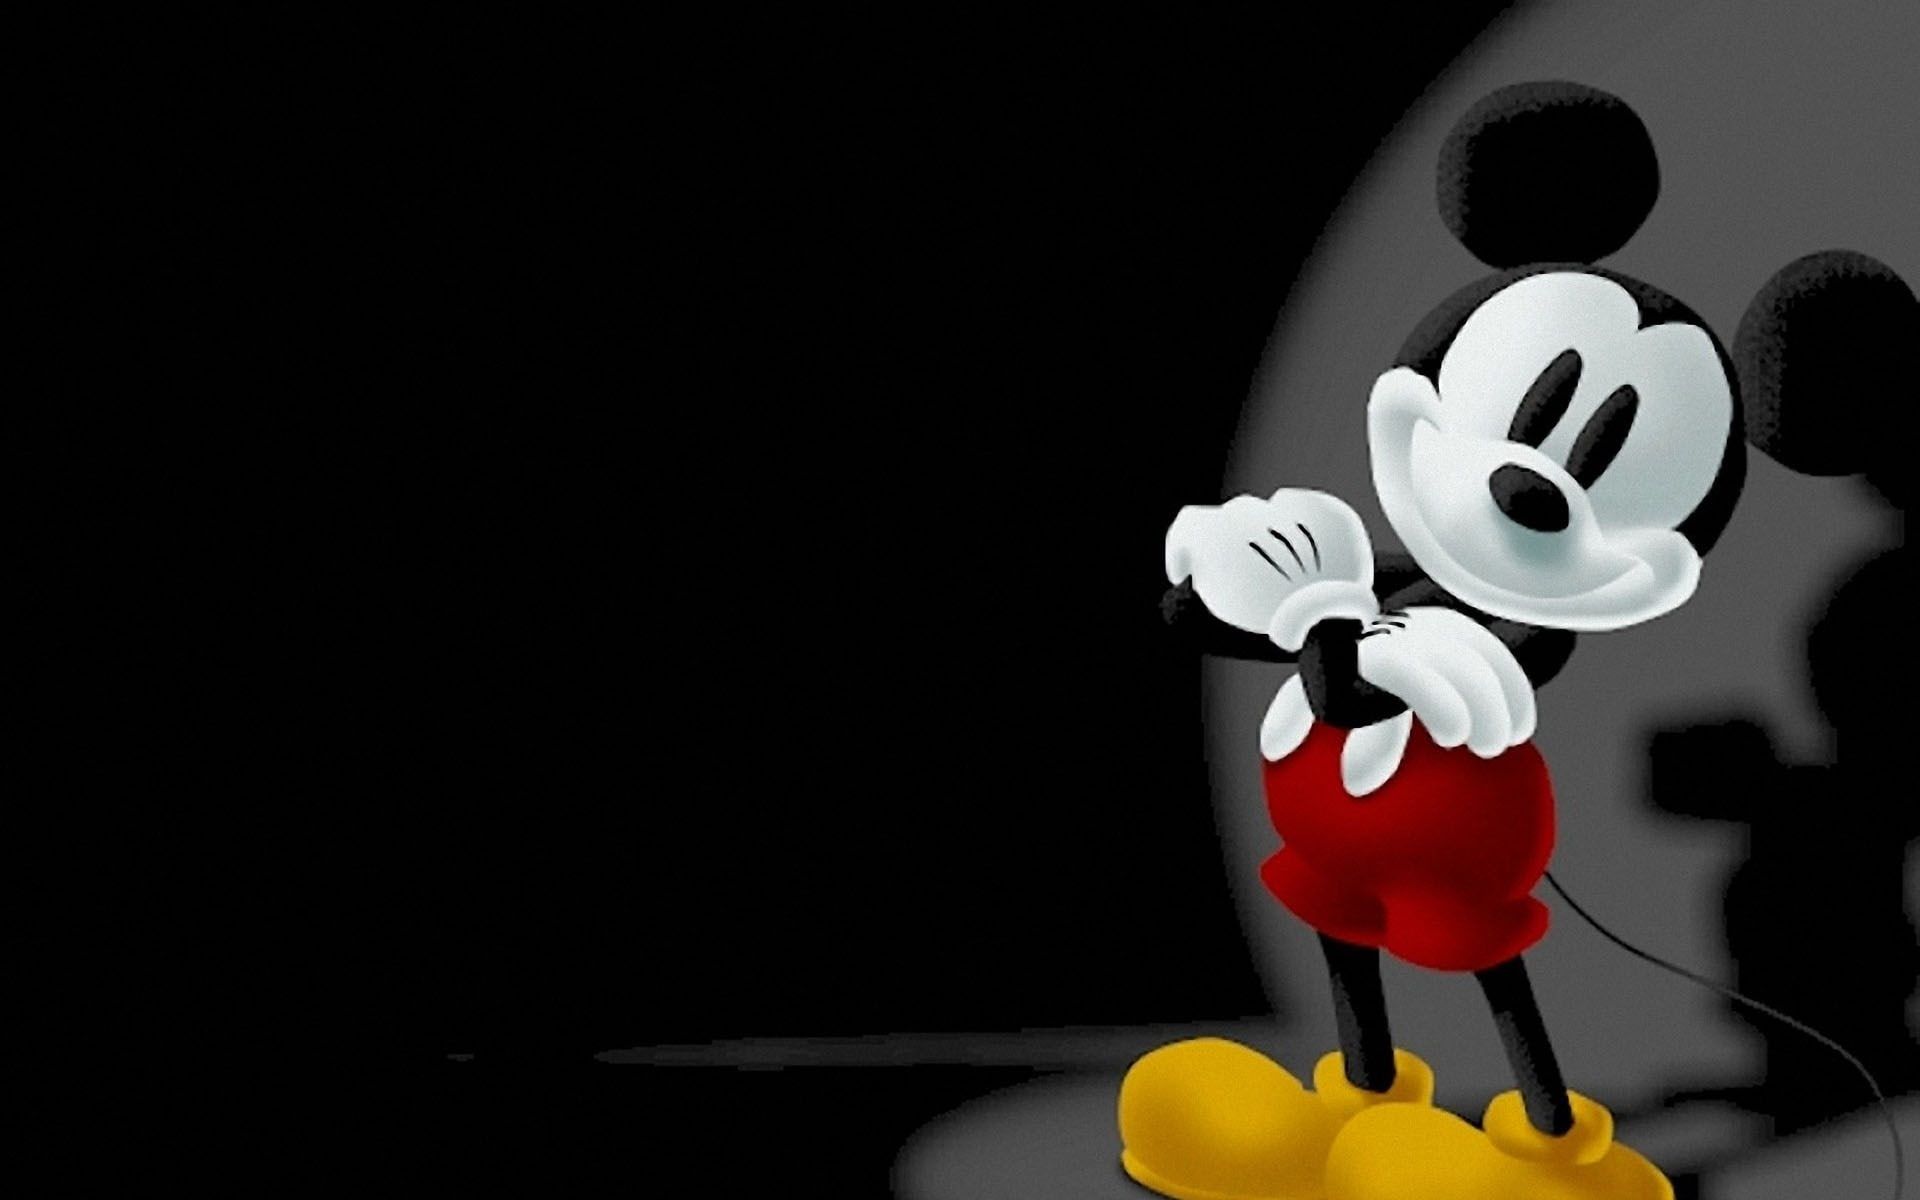 mickey mouse computer background P #wallpaper #hdwallpaper #desktop. Mickey mouse wallpaper iphone, Disney desktop wallpaper, Wallpaper iphone christmas